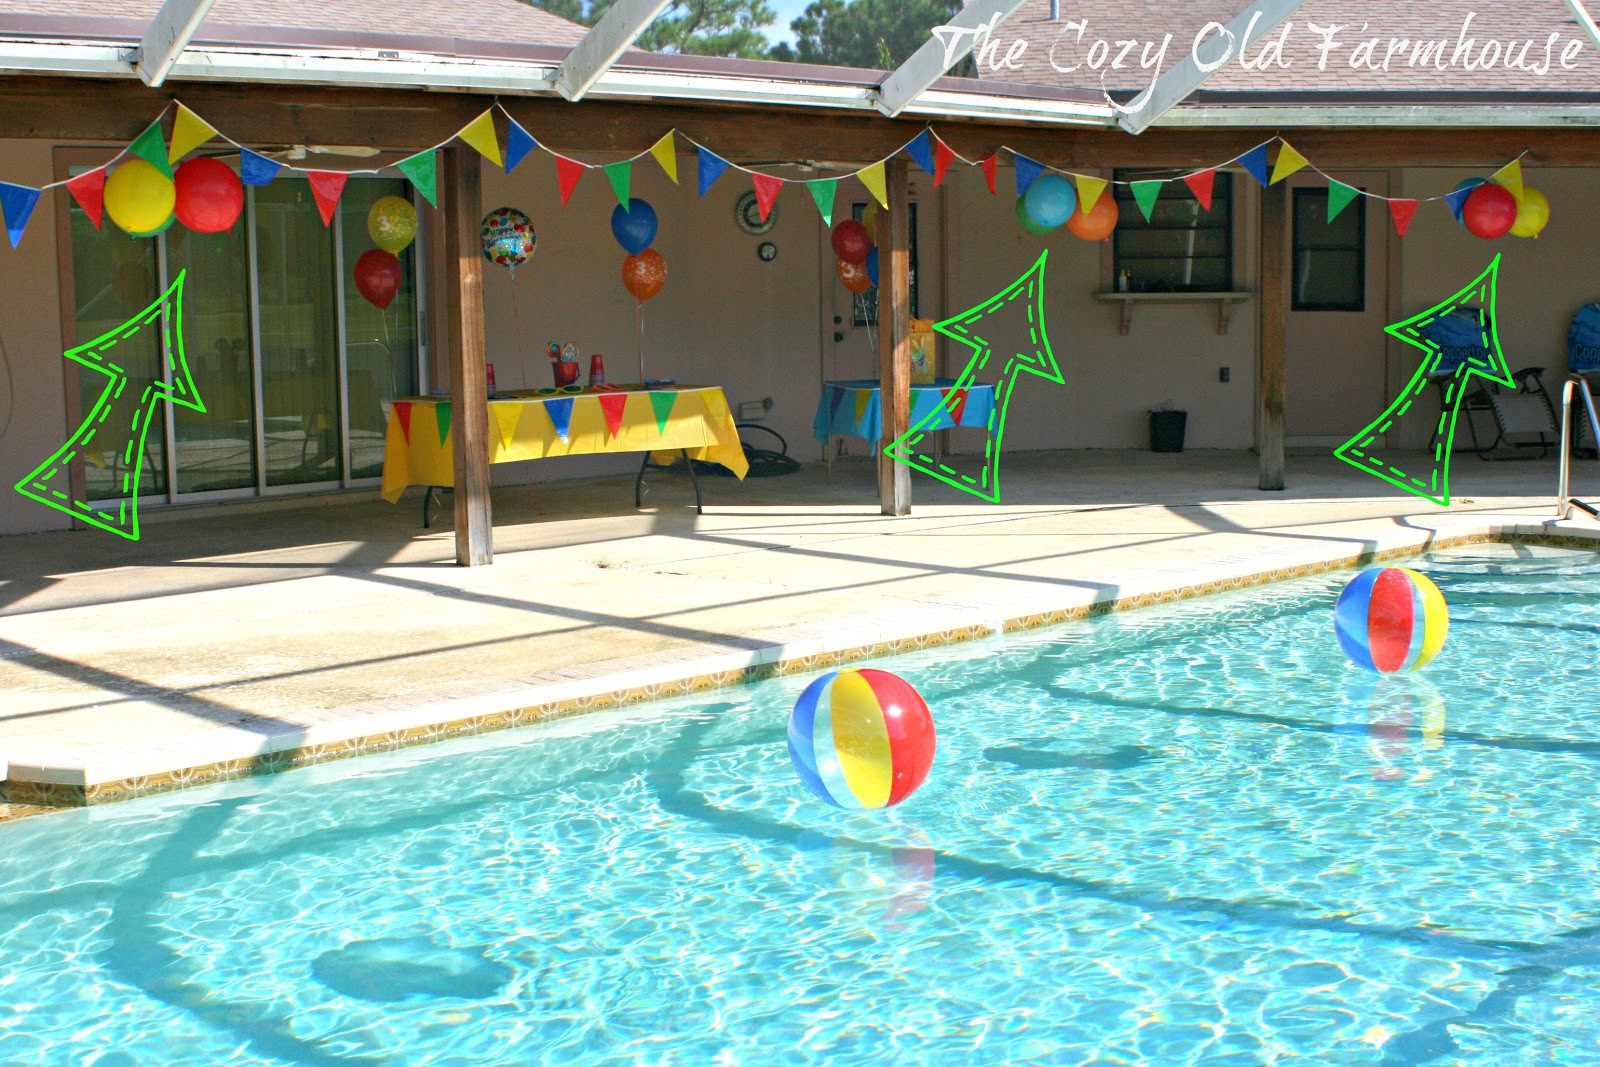 Swimming Pool Birthday Party Ideas
 The Cozy Old "Farmhouse" Simple and Bud Friendly Pool